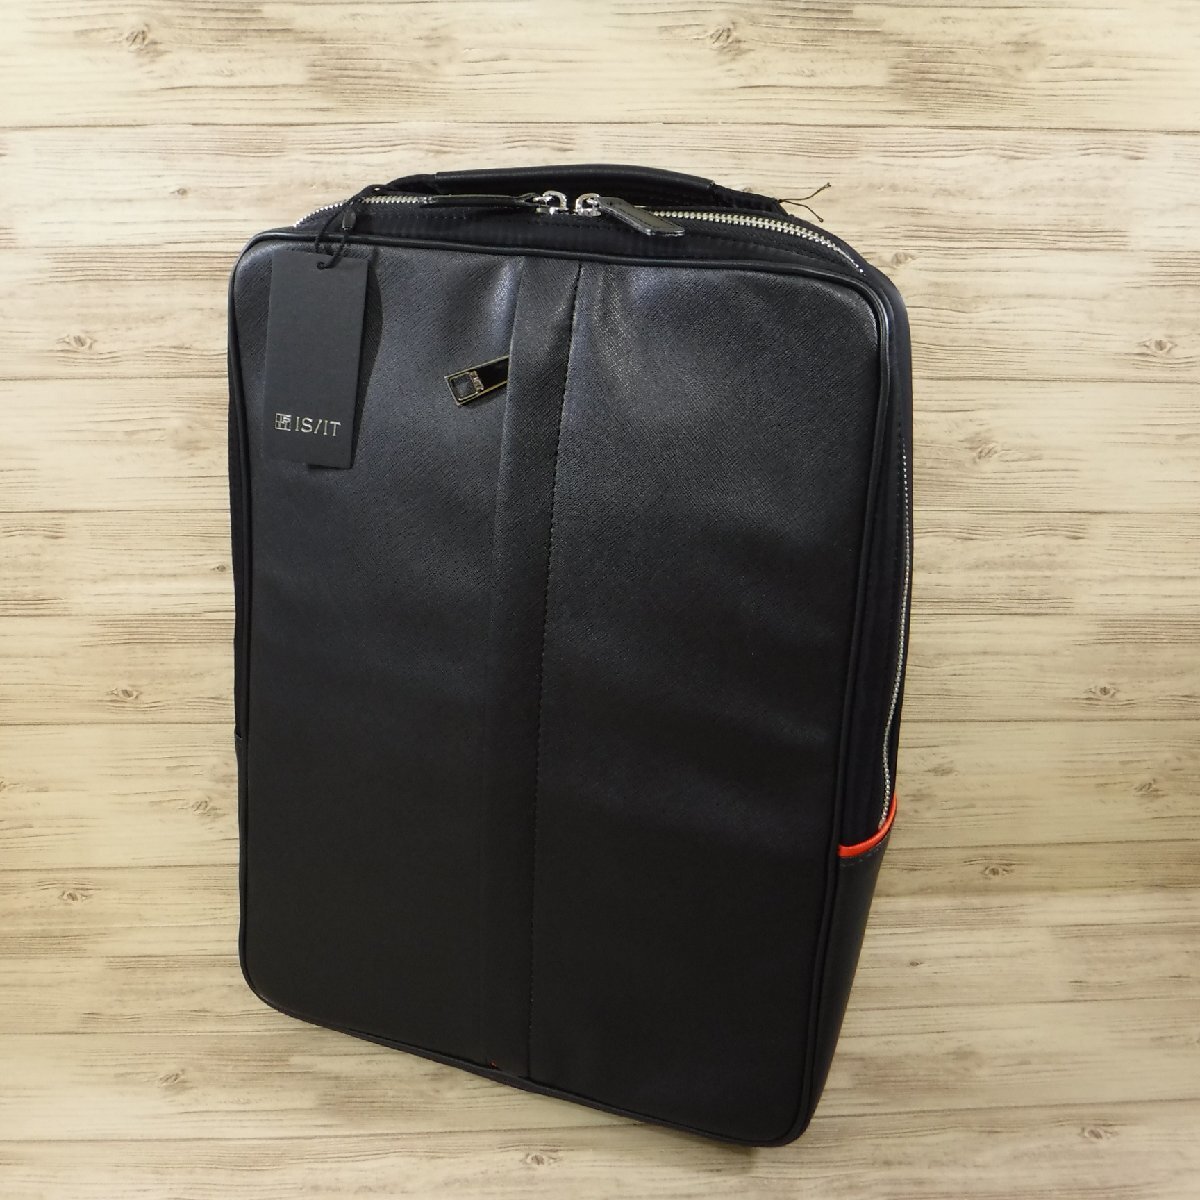 BB75izito regular price 25300 jpy new goods black 2WAY leather business rucksack water-repellent A4 size setup correspondence PC storage IS/ITsafi-ru937701